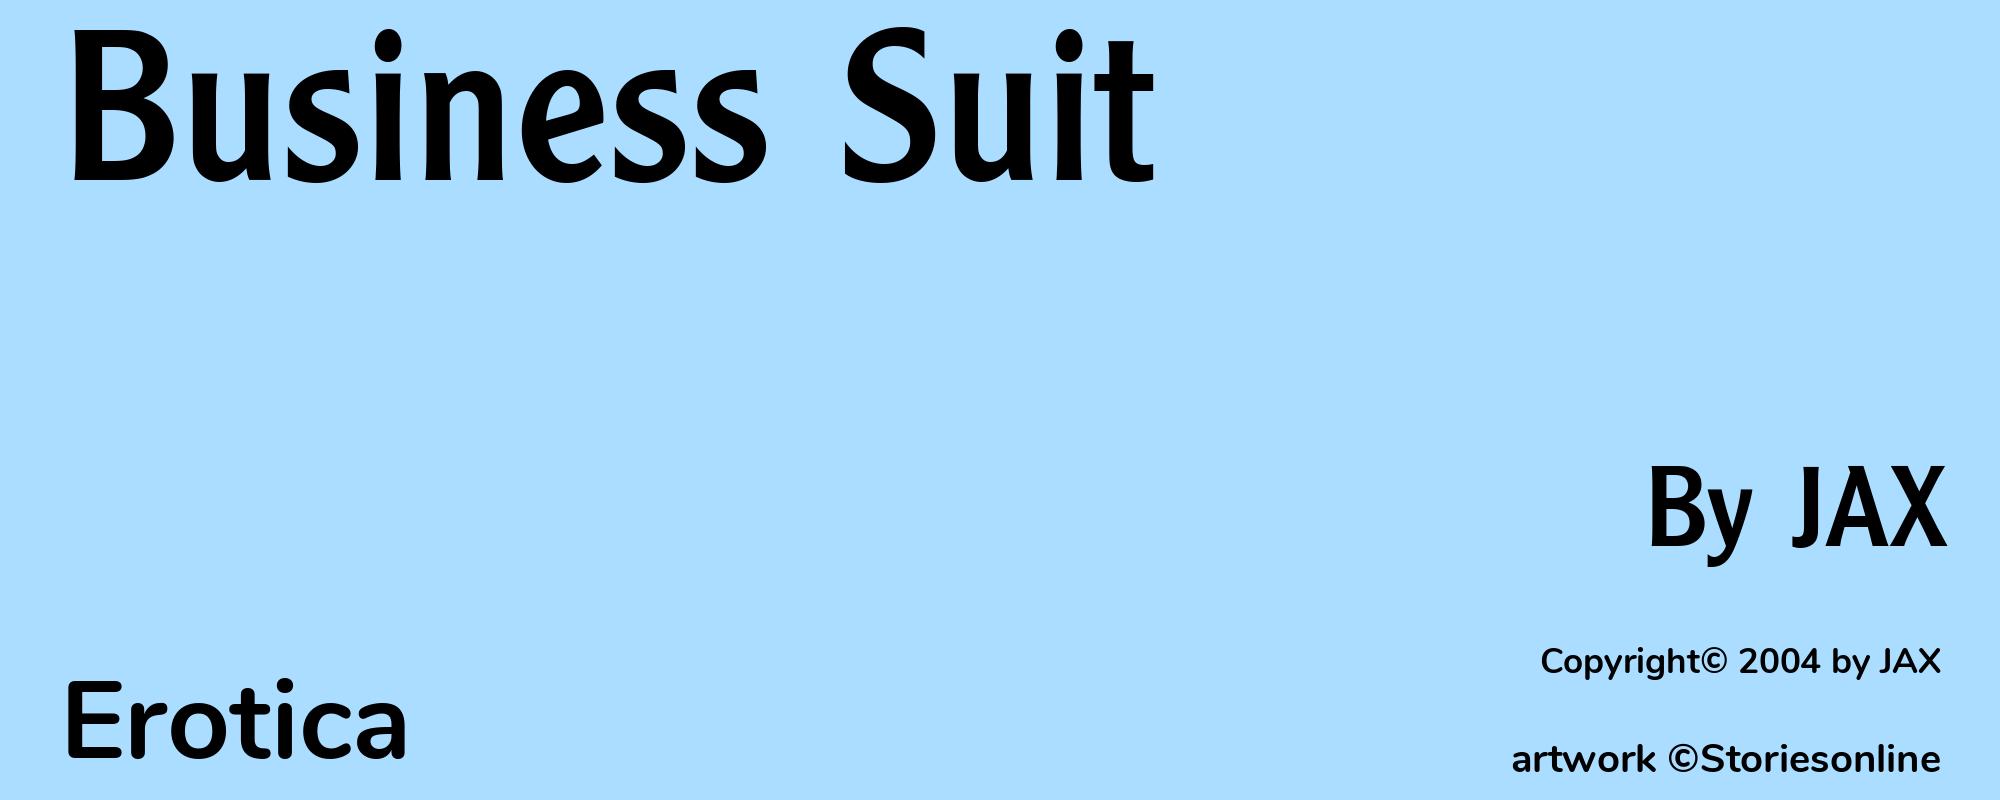 Business Suit - Cover